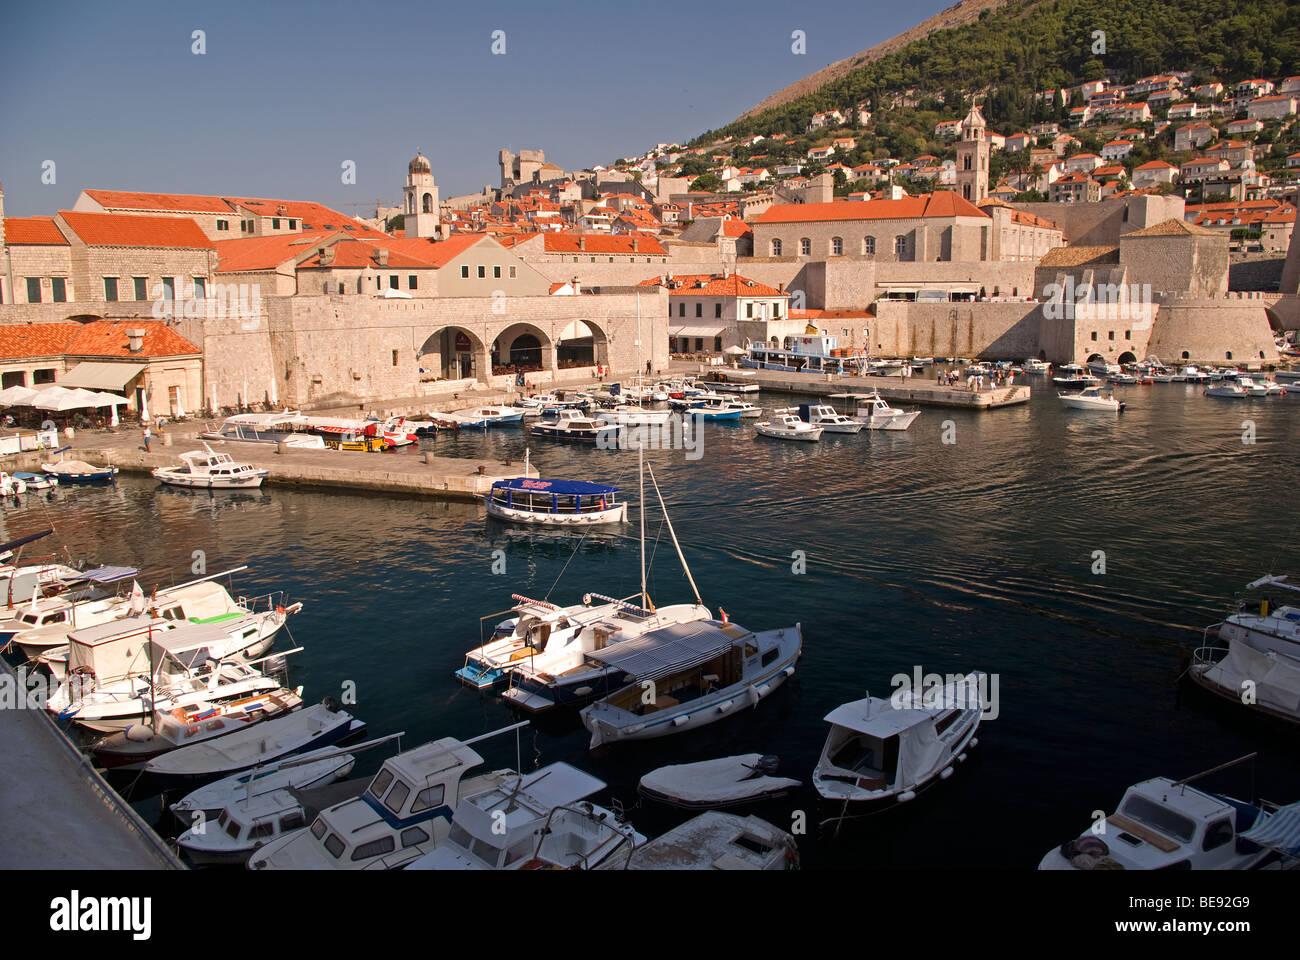 Croatia; Hrvartska; Kroatien; Dubrovnik, Fishboat and small tourist boat harbor, harbour, surrounded by old City Stock Photo